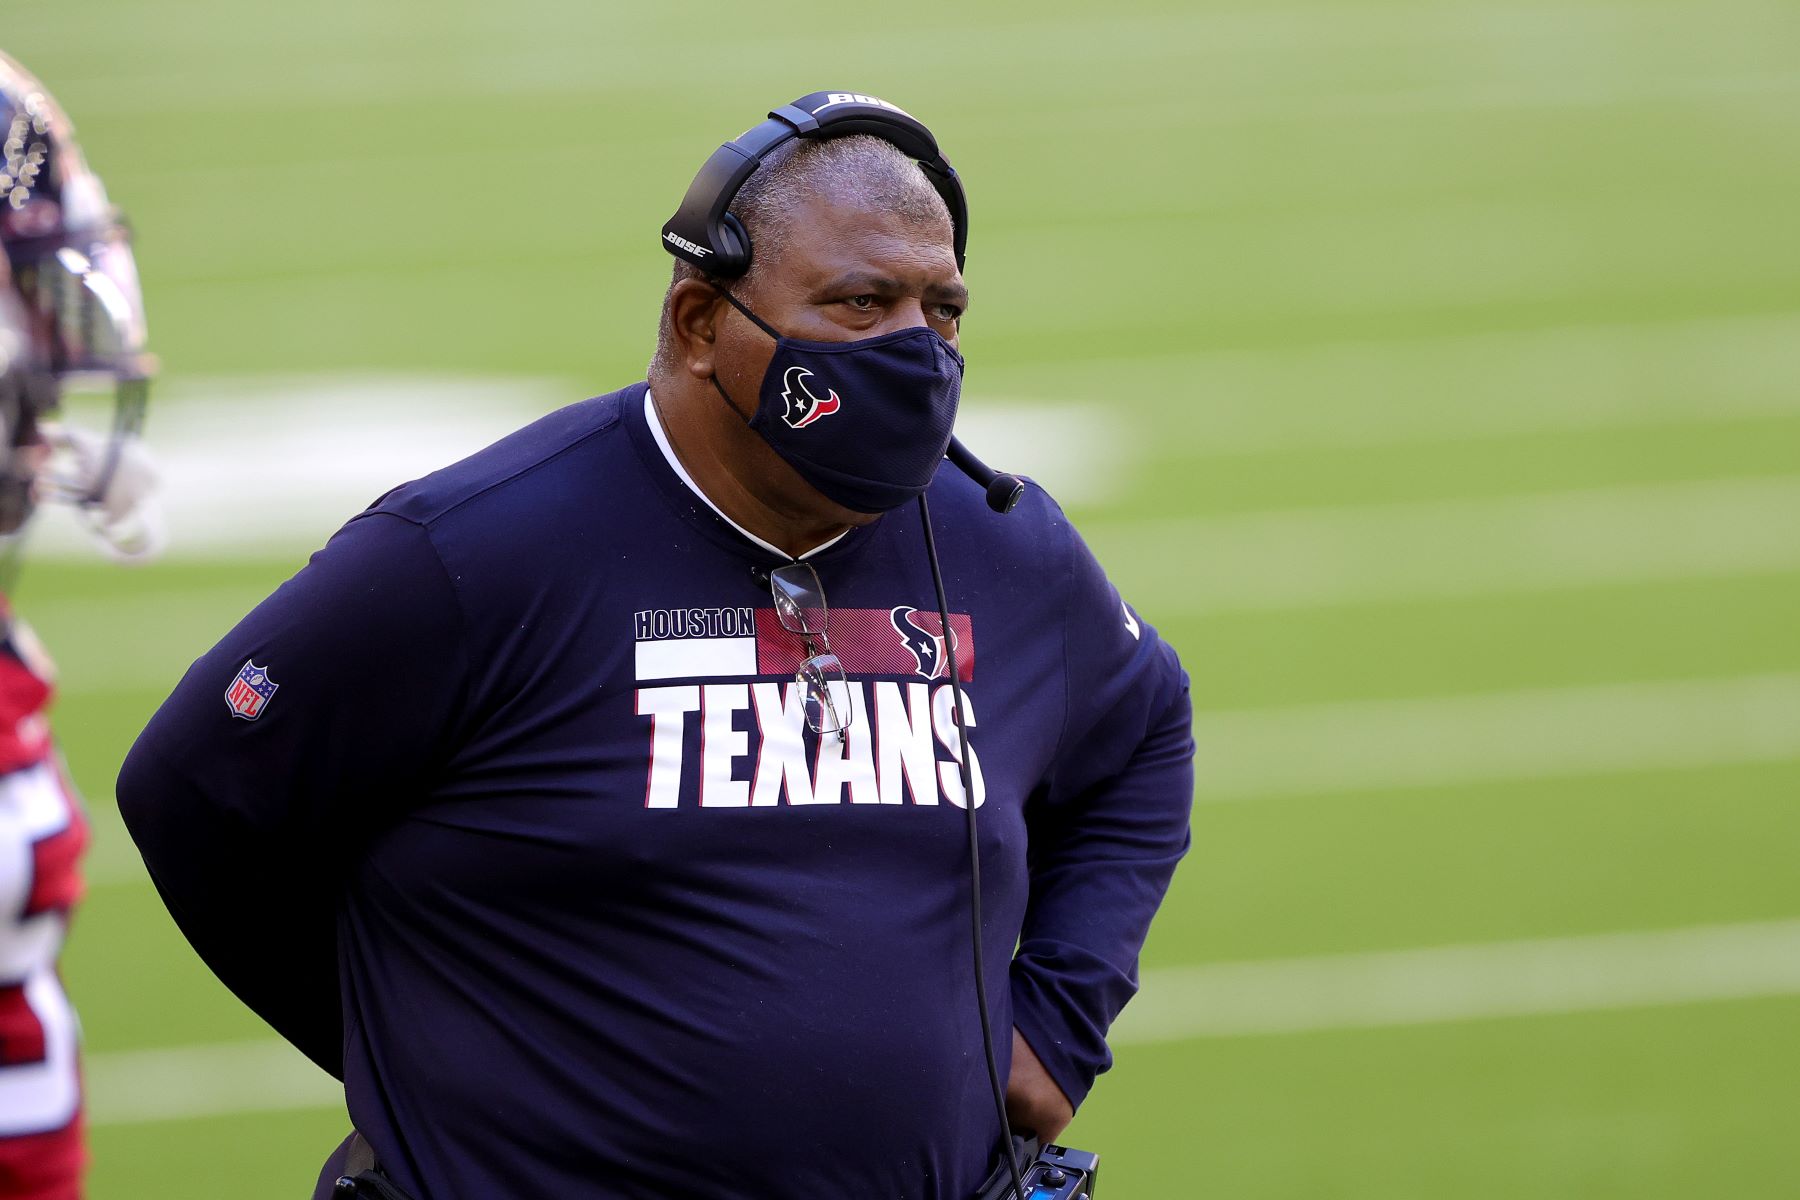 Former Kansas City Chiefs and current Houston Texans Head Coach Romeo Crennel during a game against the Indianapolis Colts